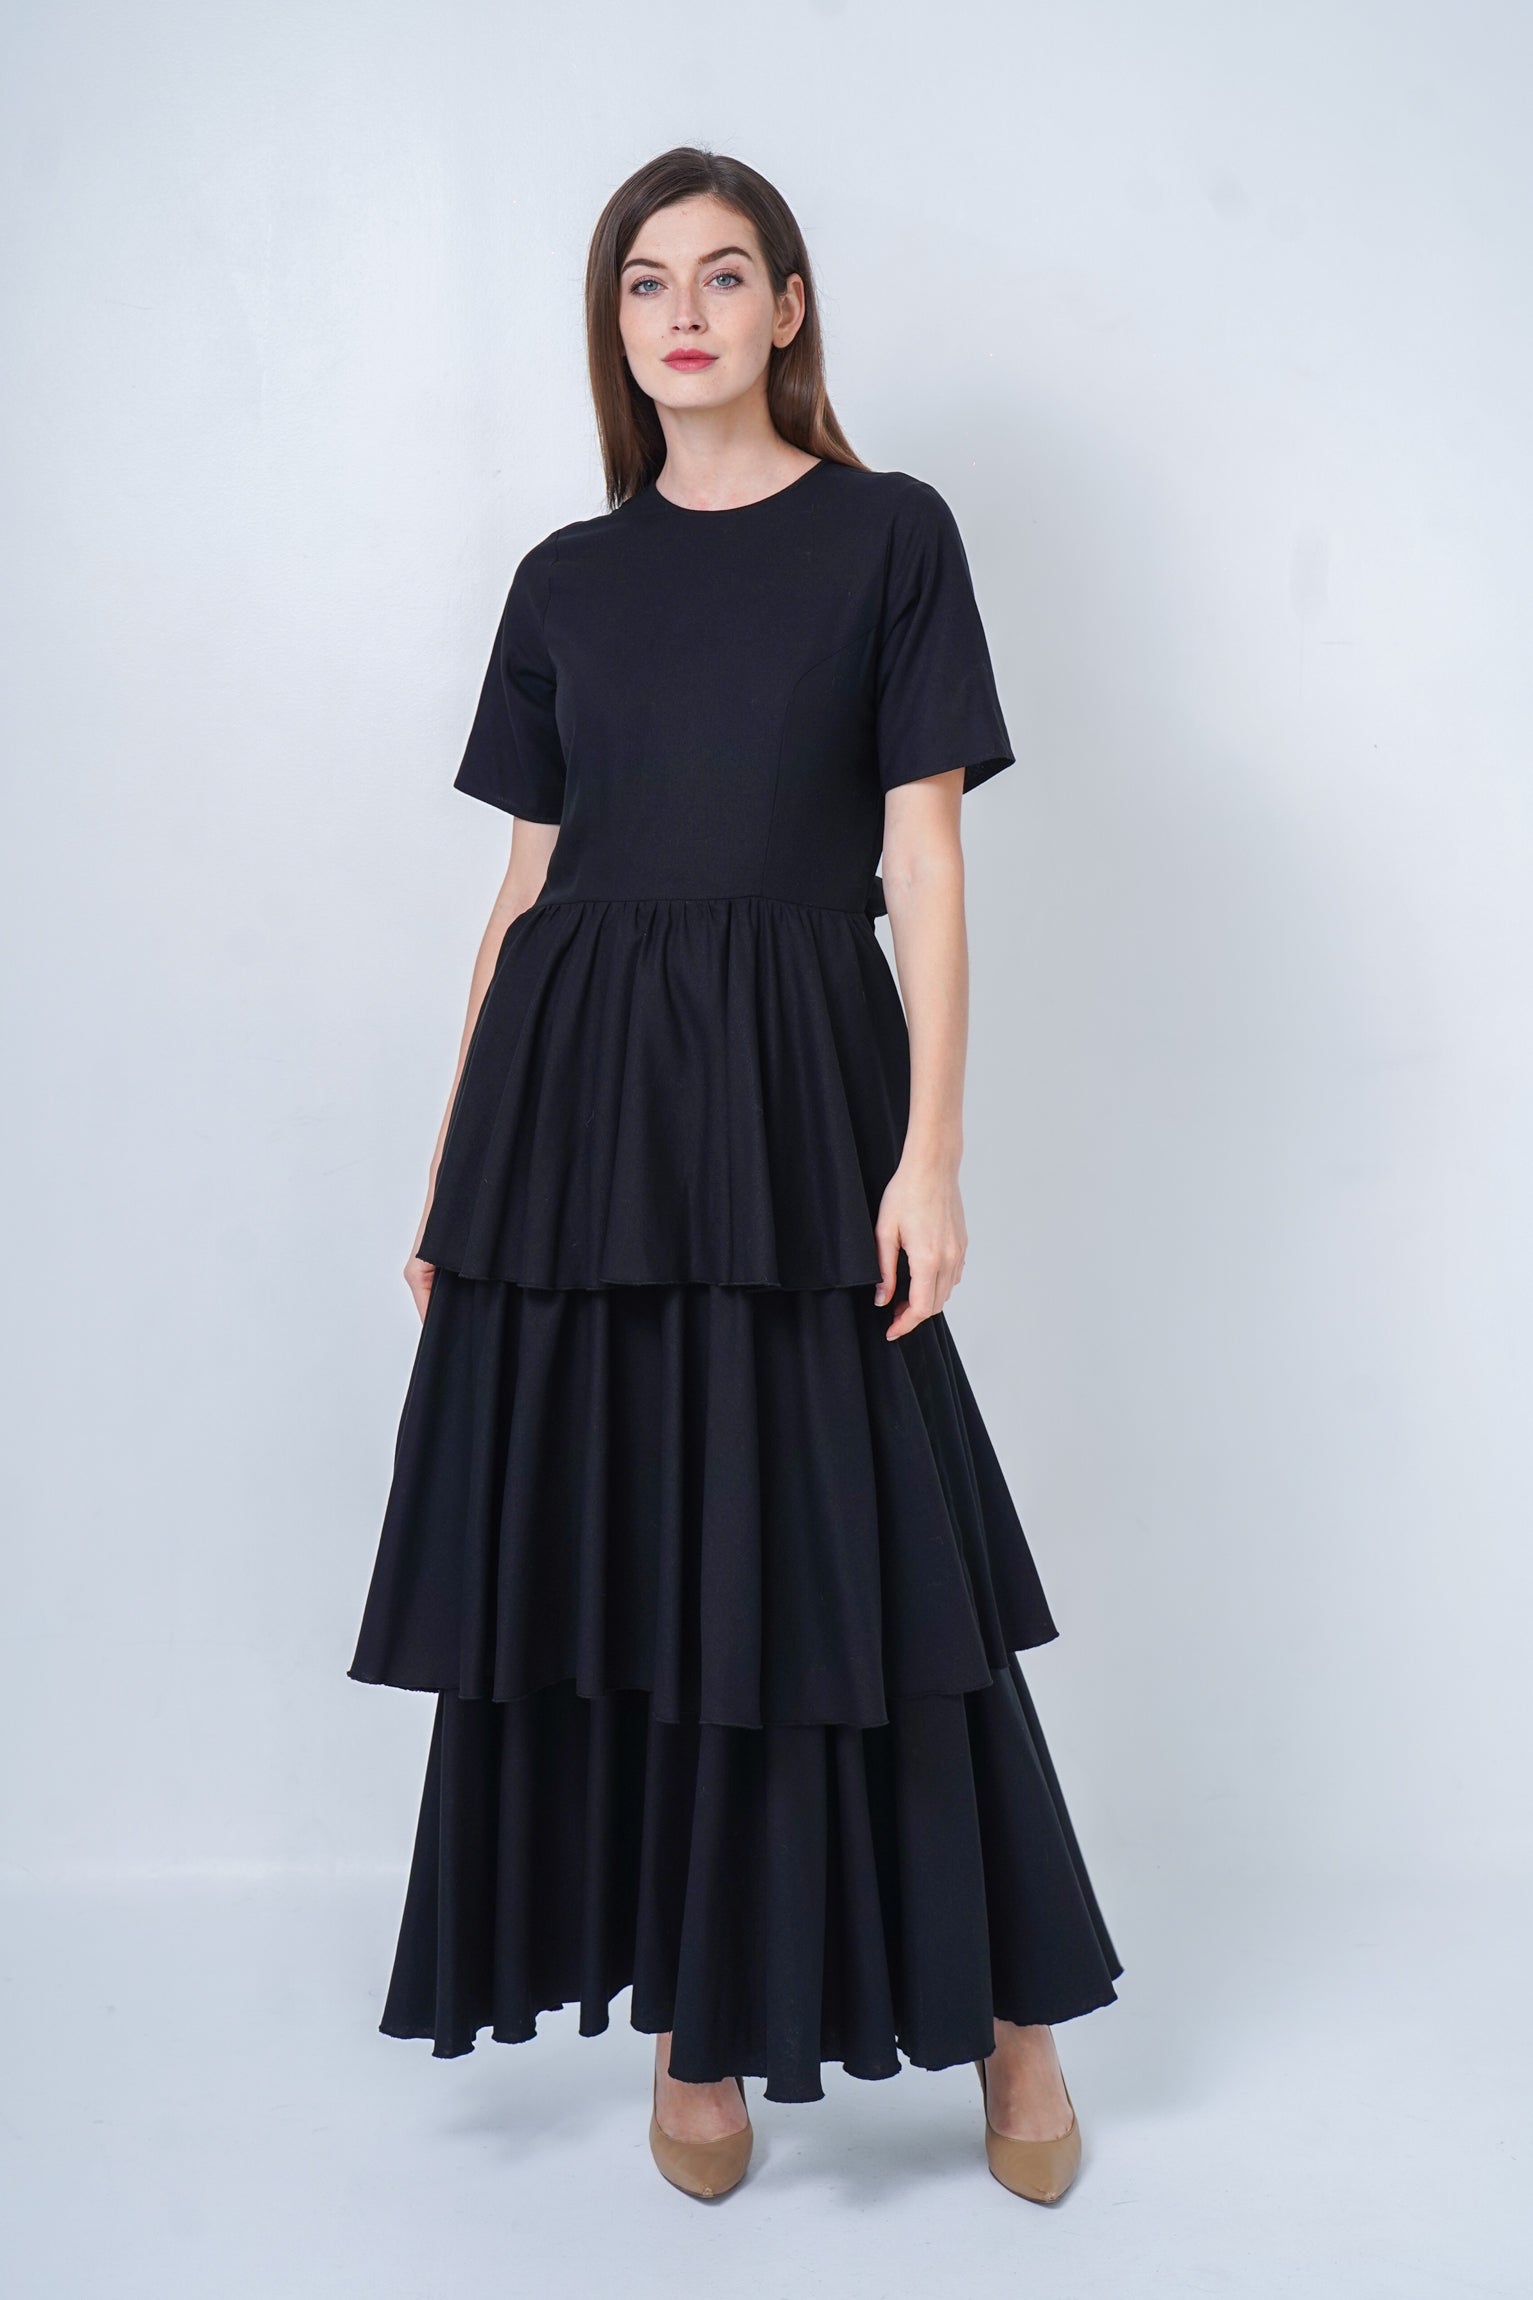 Black Long Tiered Dress With Bow